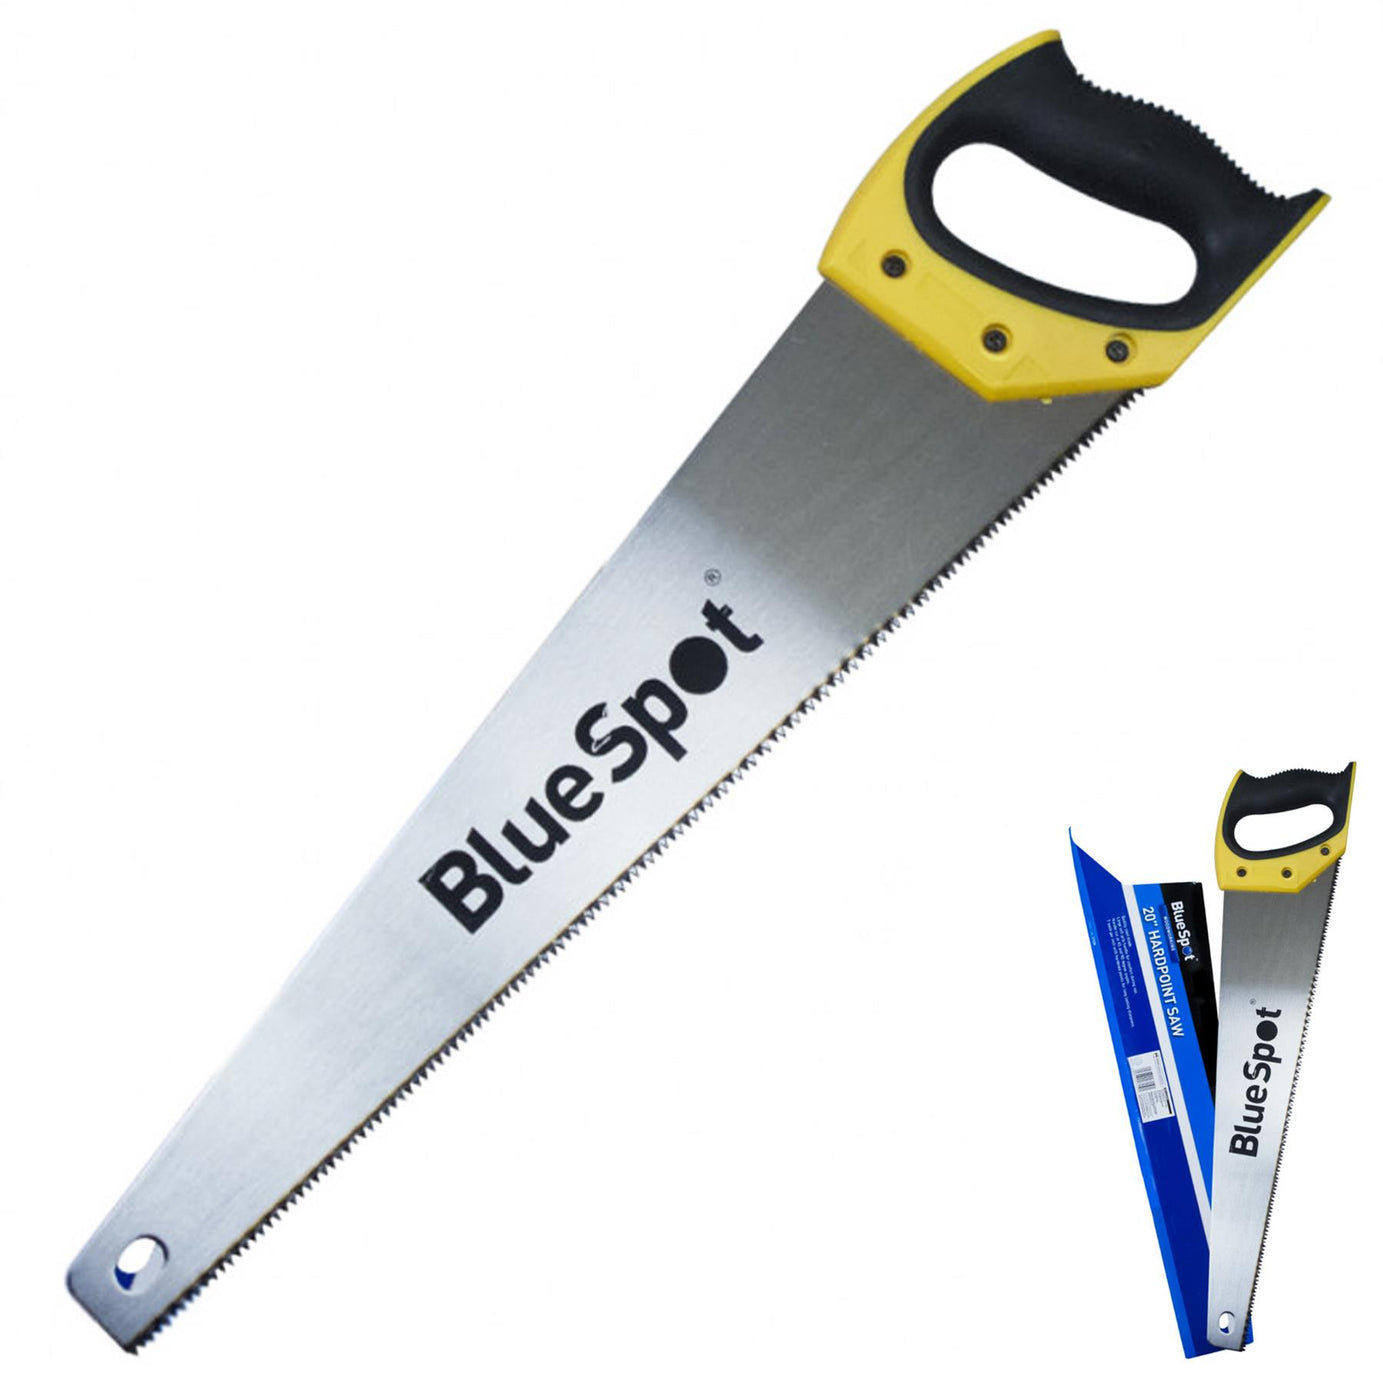 BlueSpot 500mm / 20" HAND SAW Wood Carpentry 8 TPI Sharpoint Hard point NEW